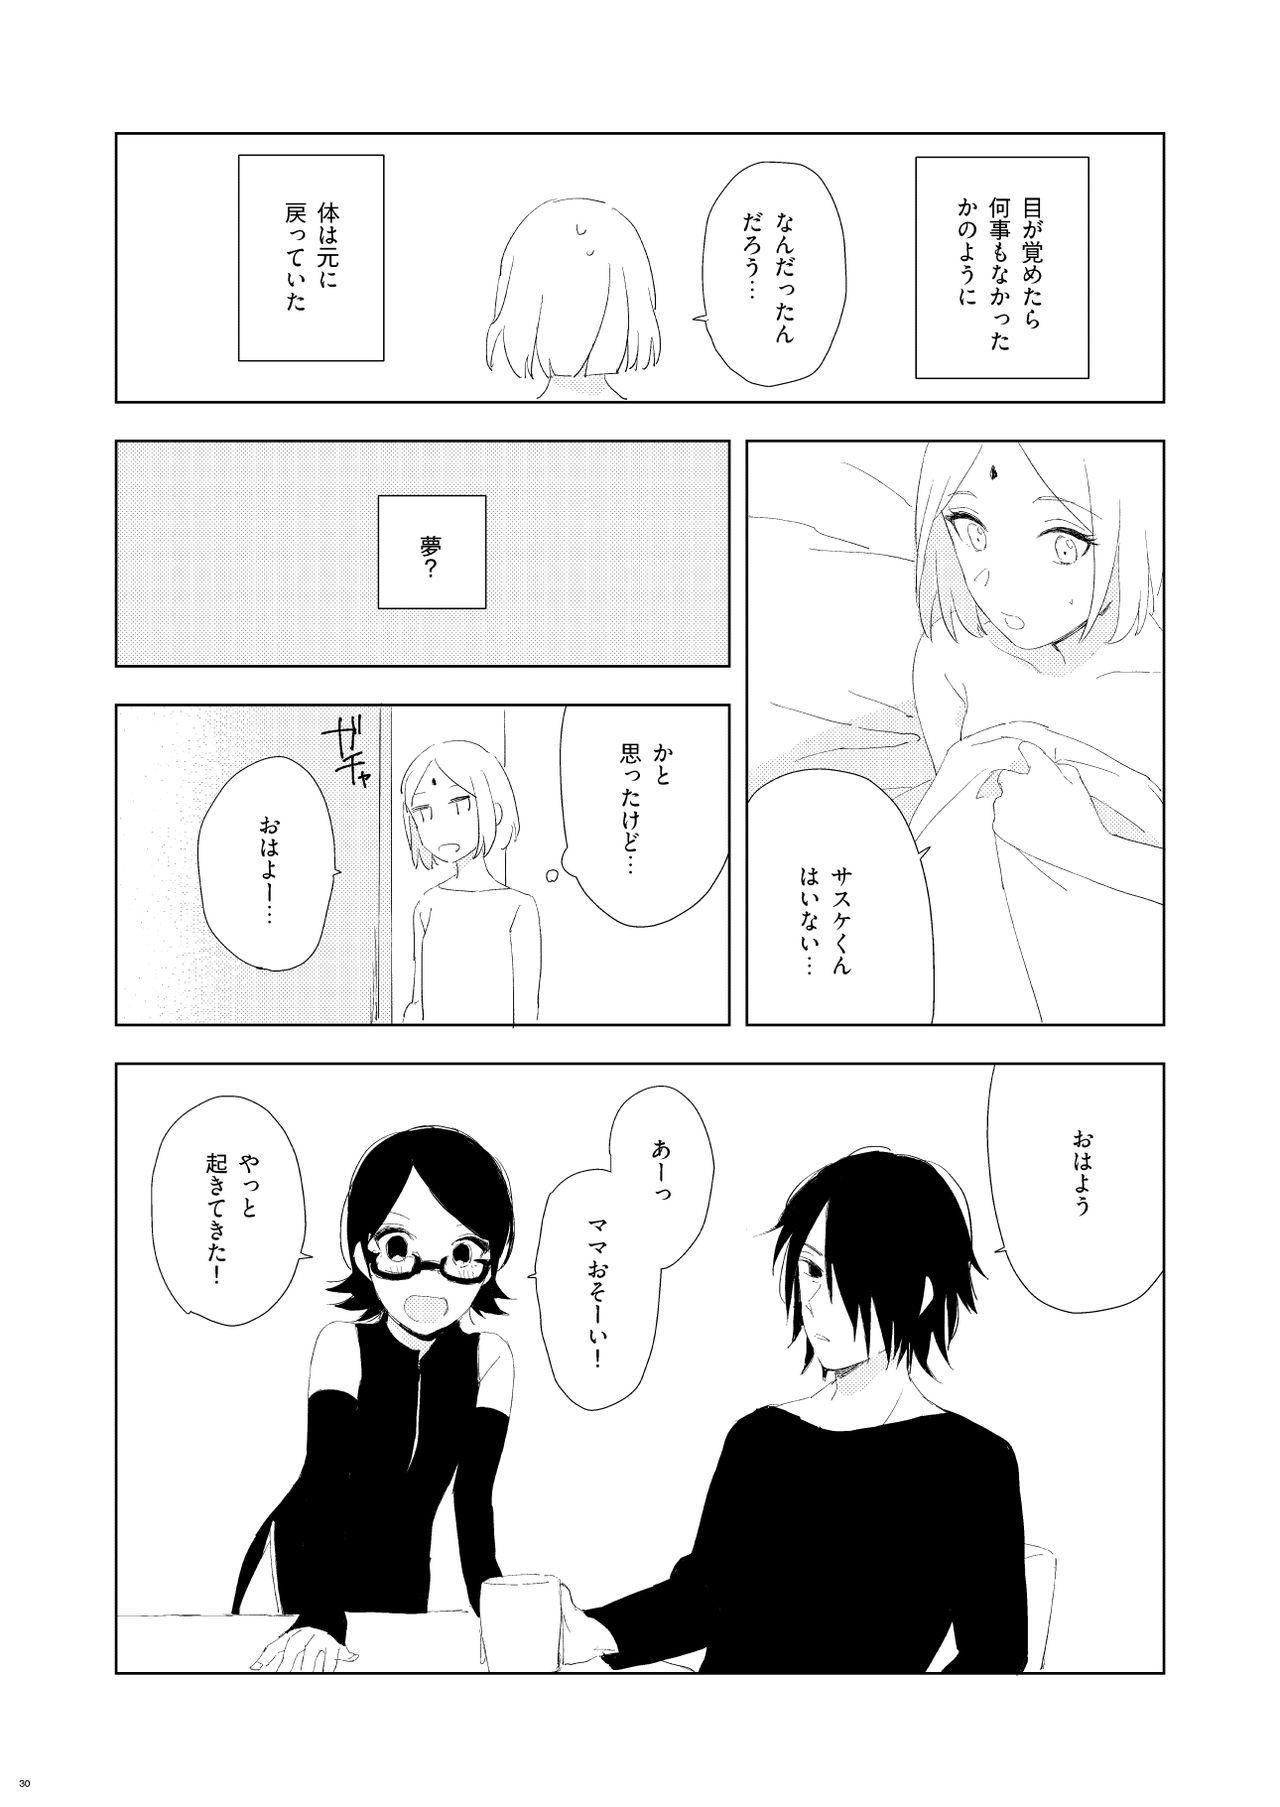 Leather OMG - Boruto Messy - Page 26